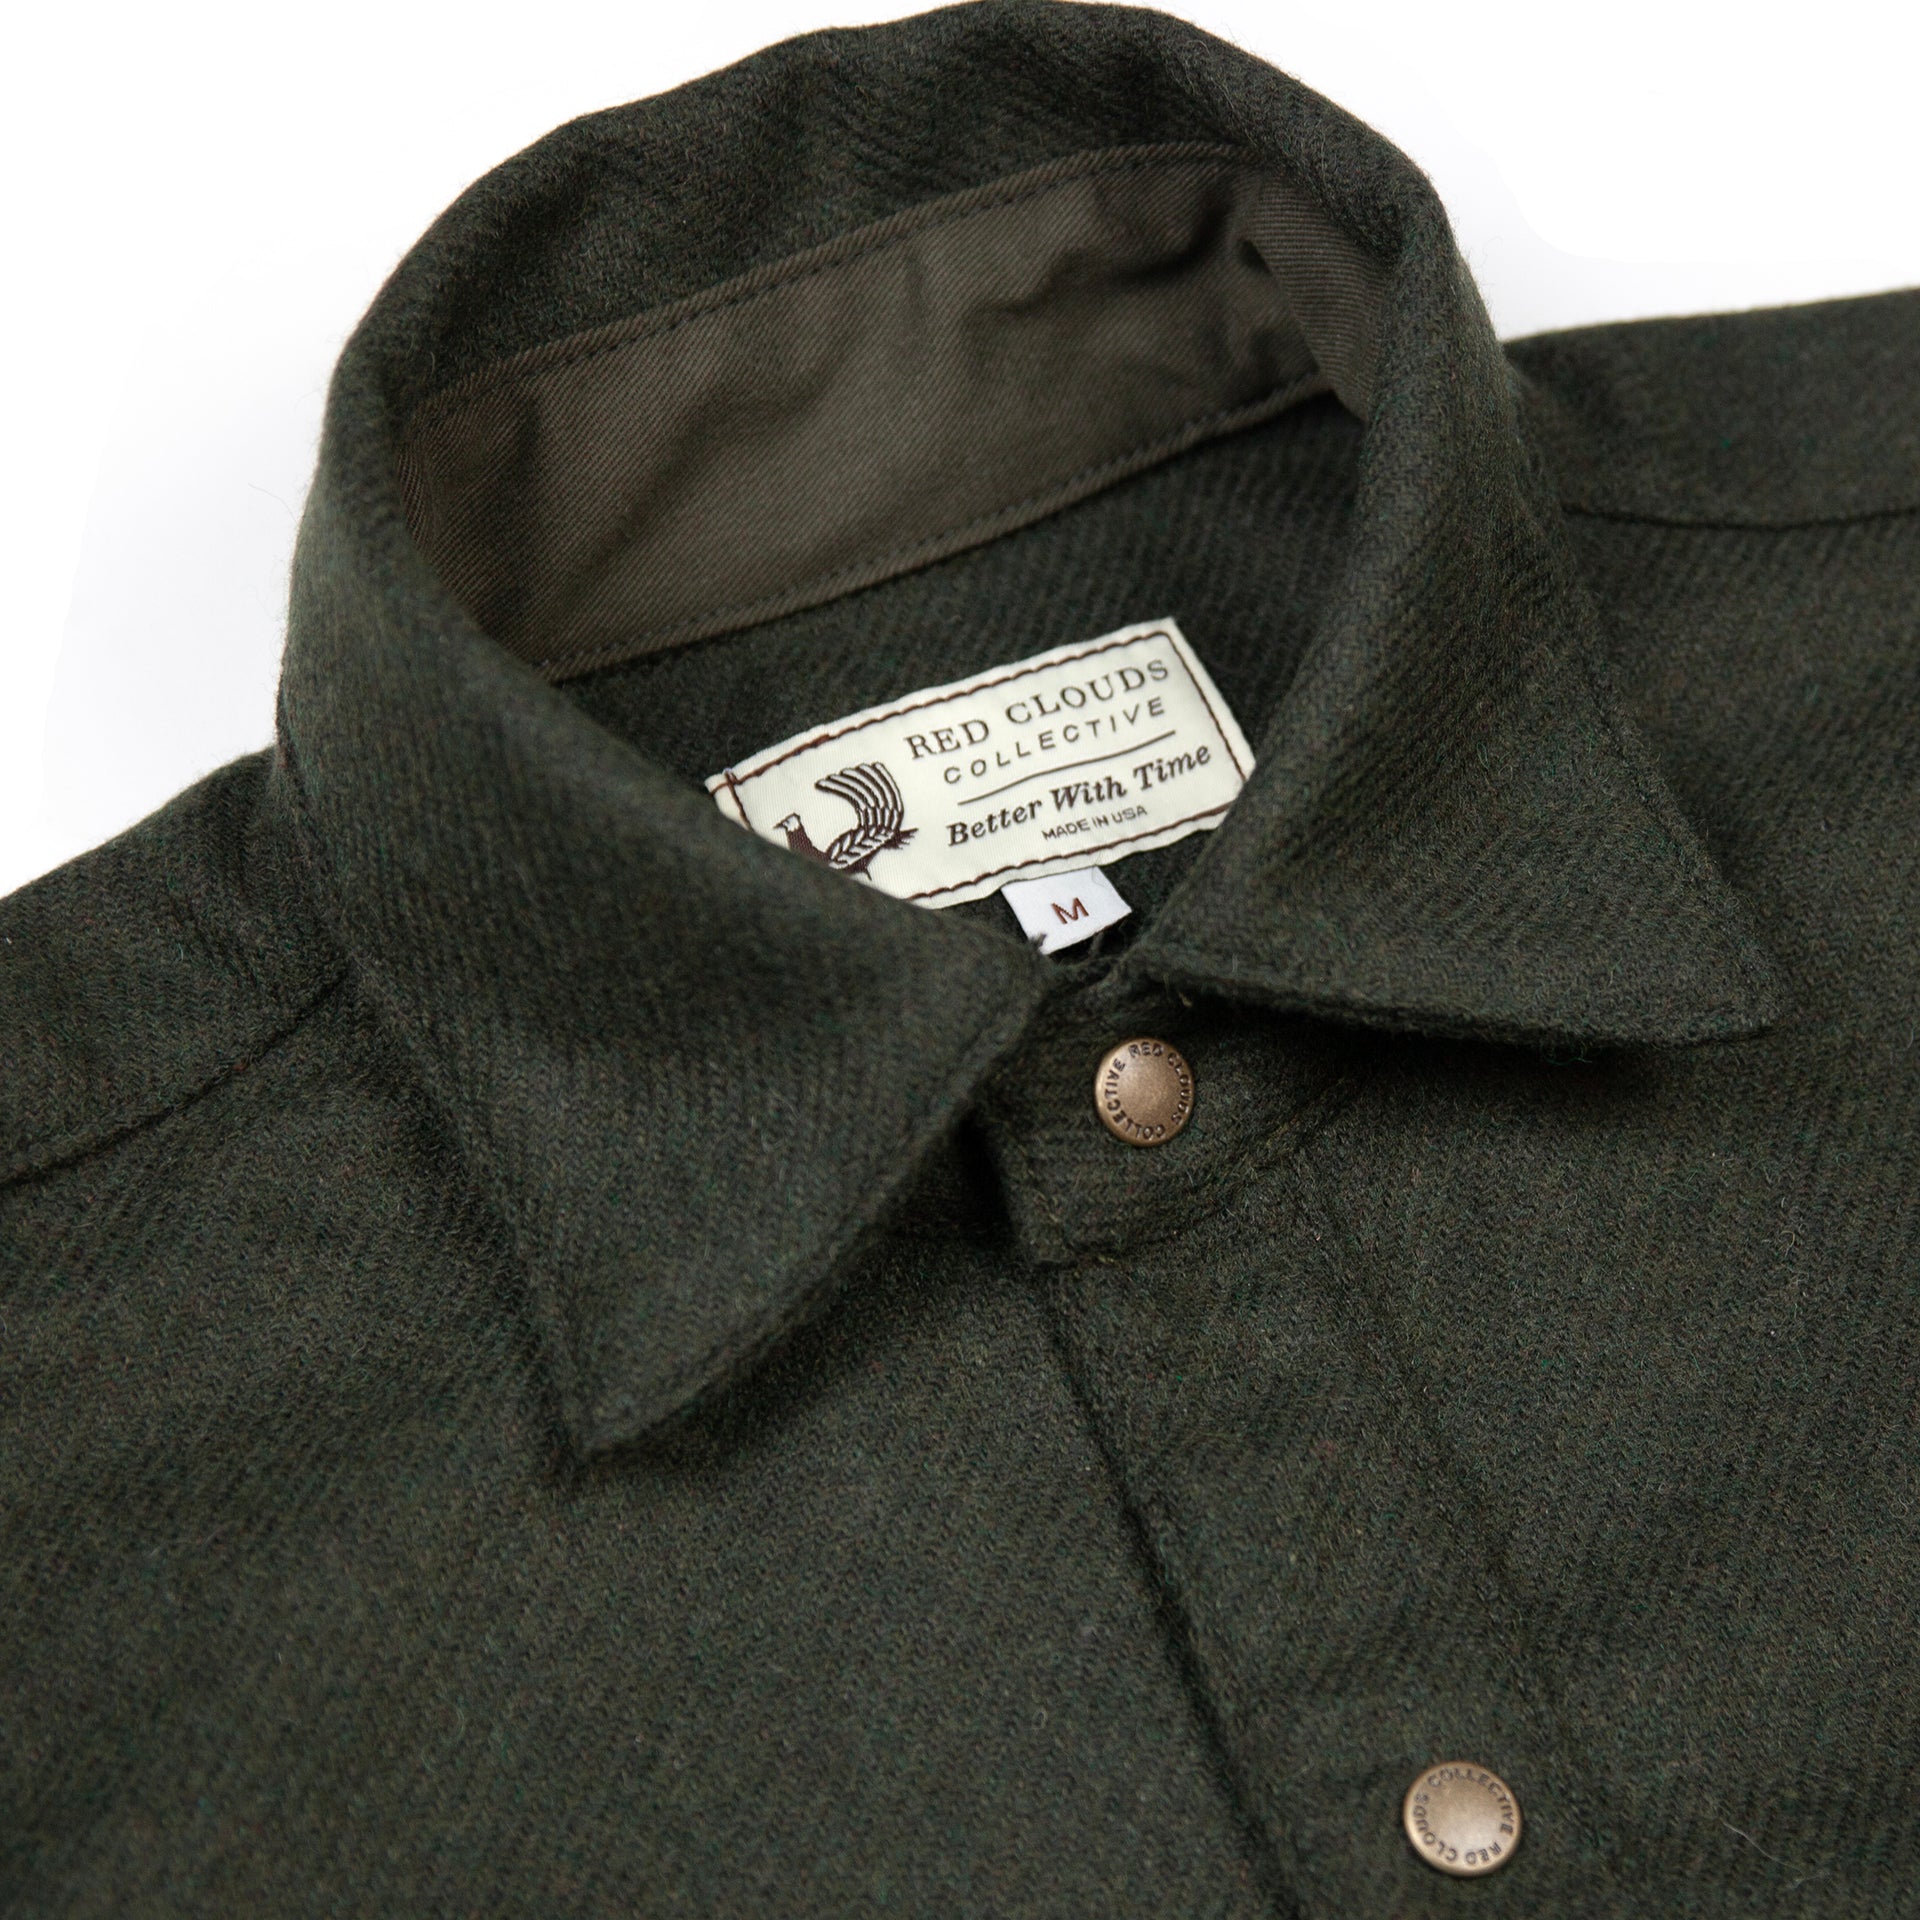 Witham Wool Shirt - Olive